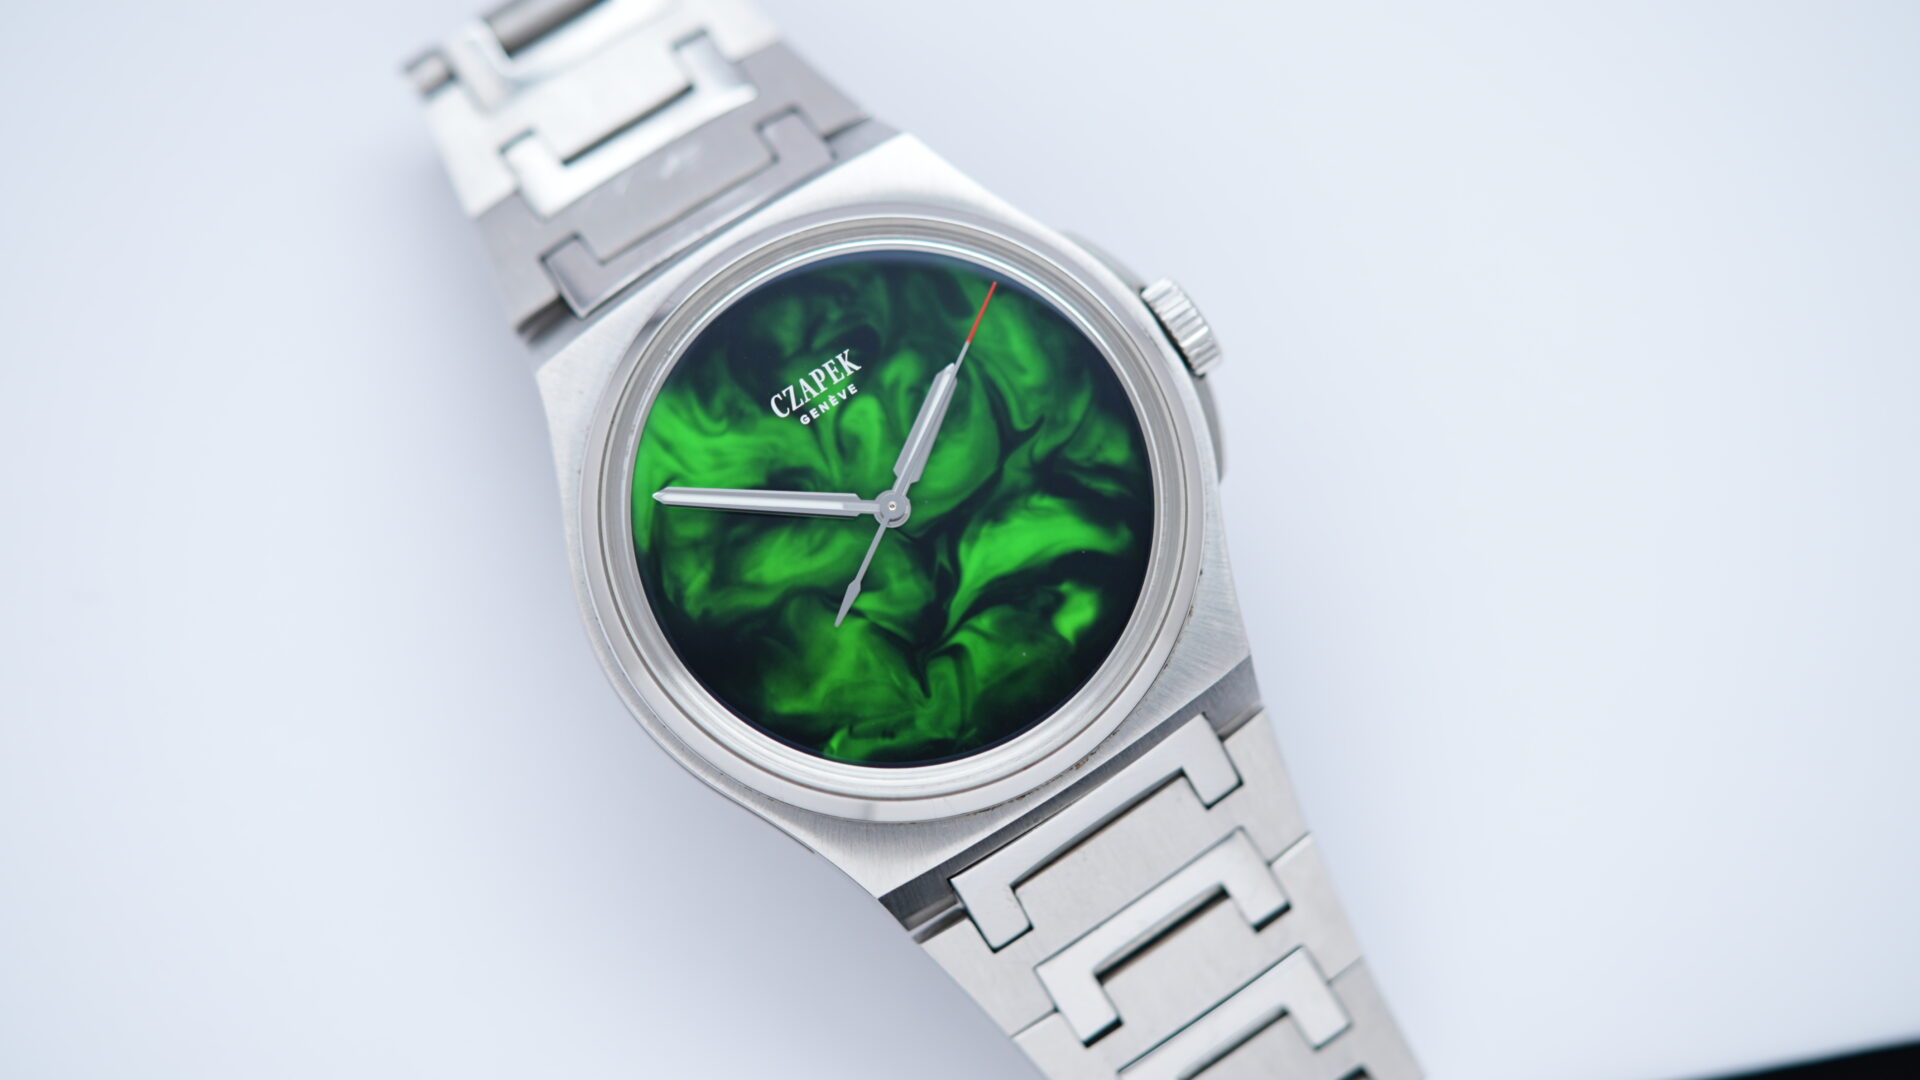 Czapek ANTARCTIQUE SPECIAL EDITION Emerald Iceberg Limited Edition watch featured under white lighting on an angle.